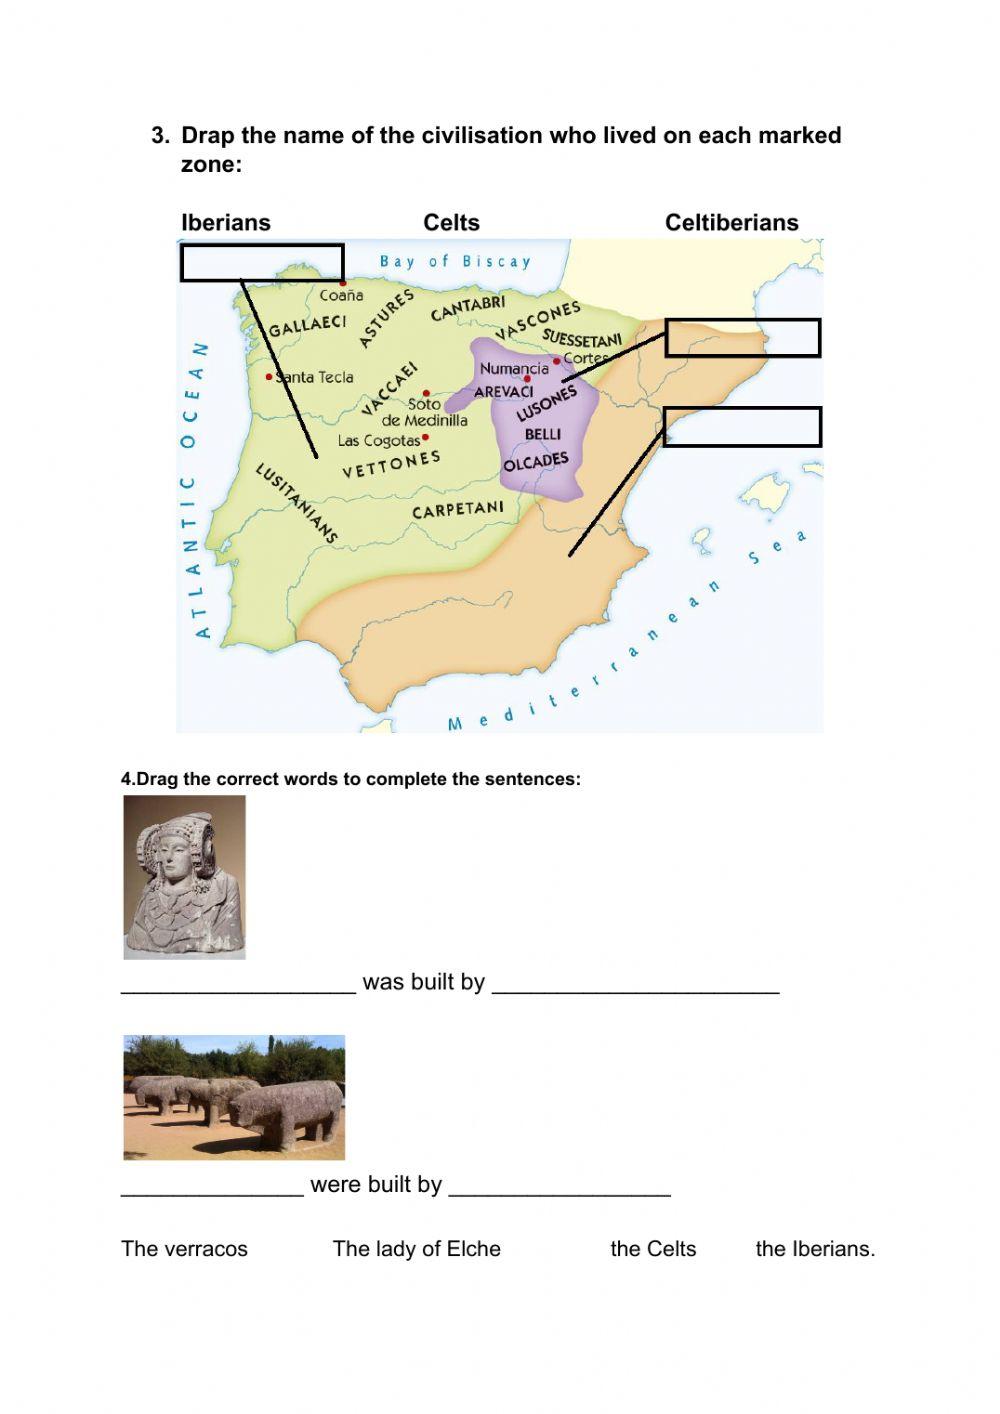 Ancient Ages in the Iberian Peninsula